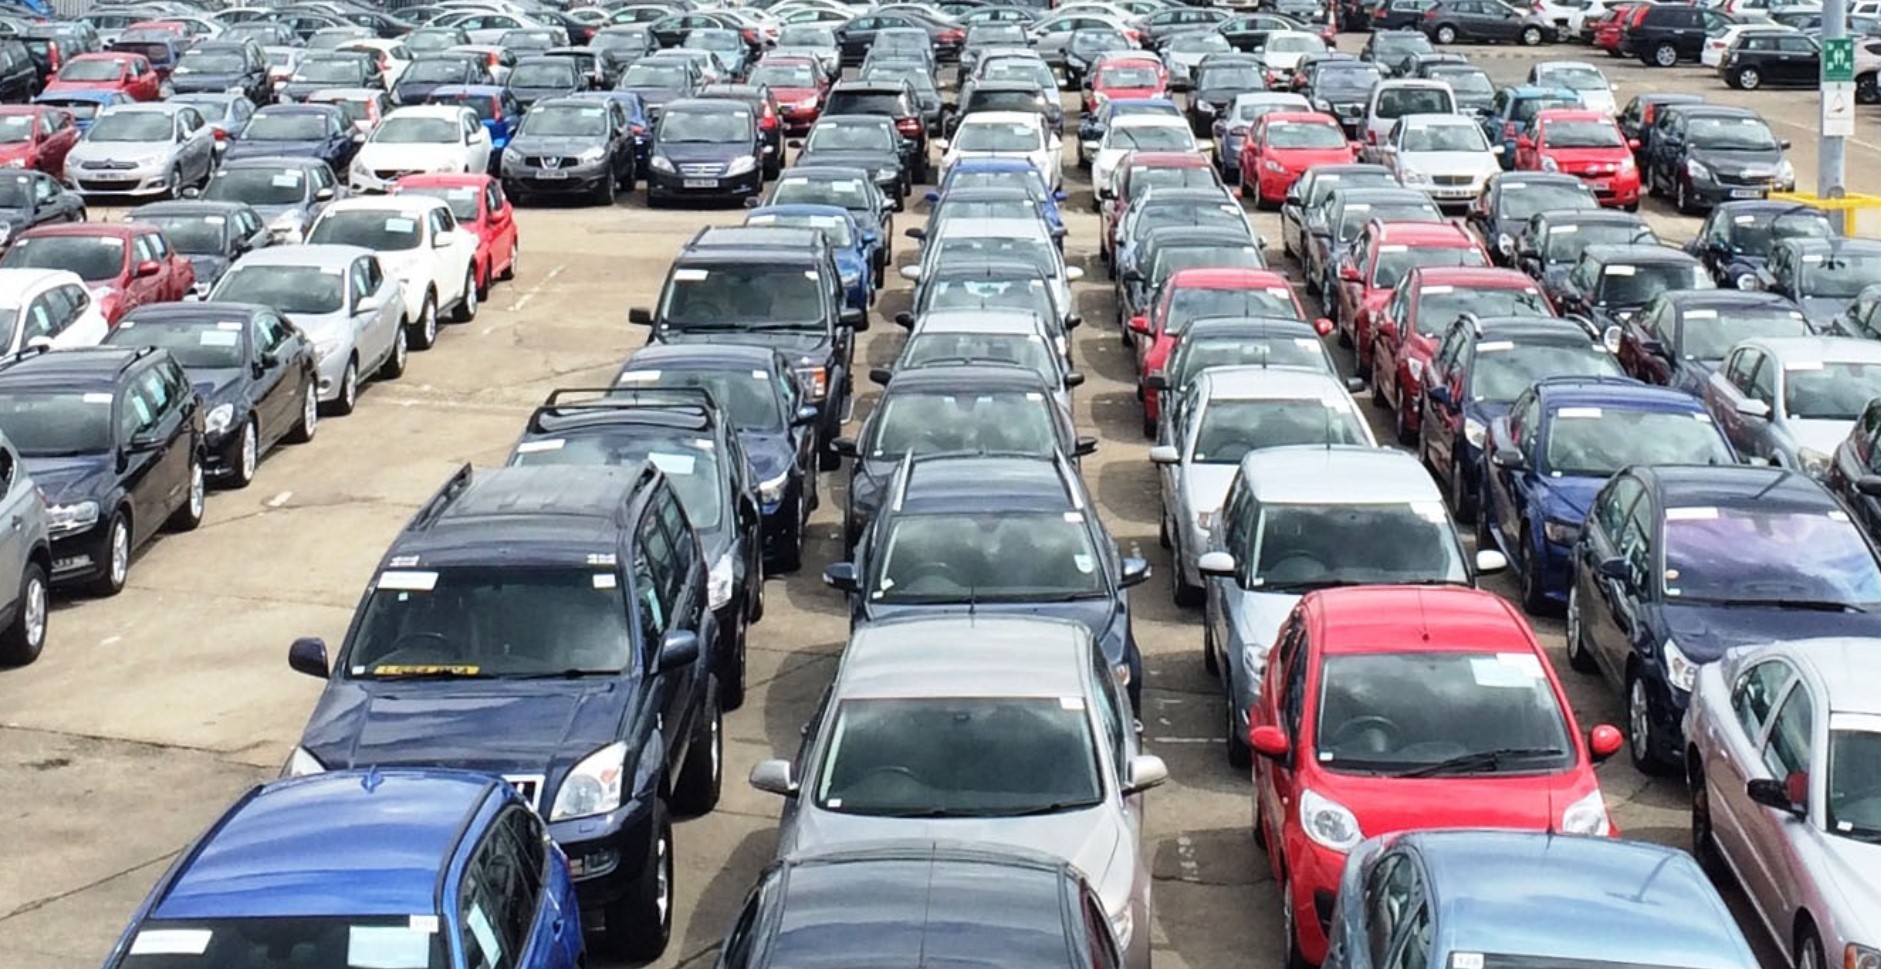 When will car auctions reopen to the public